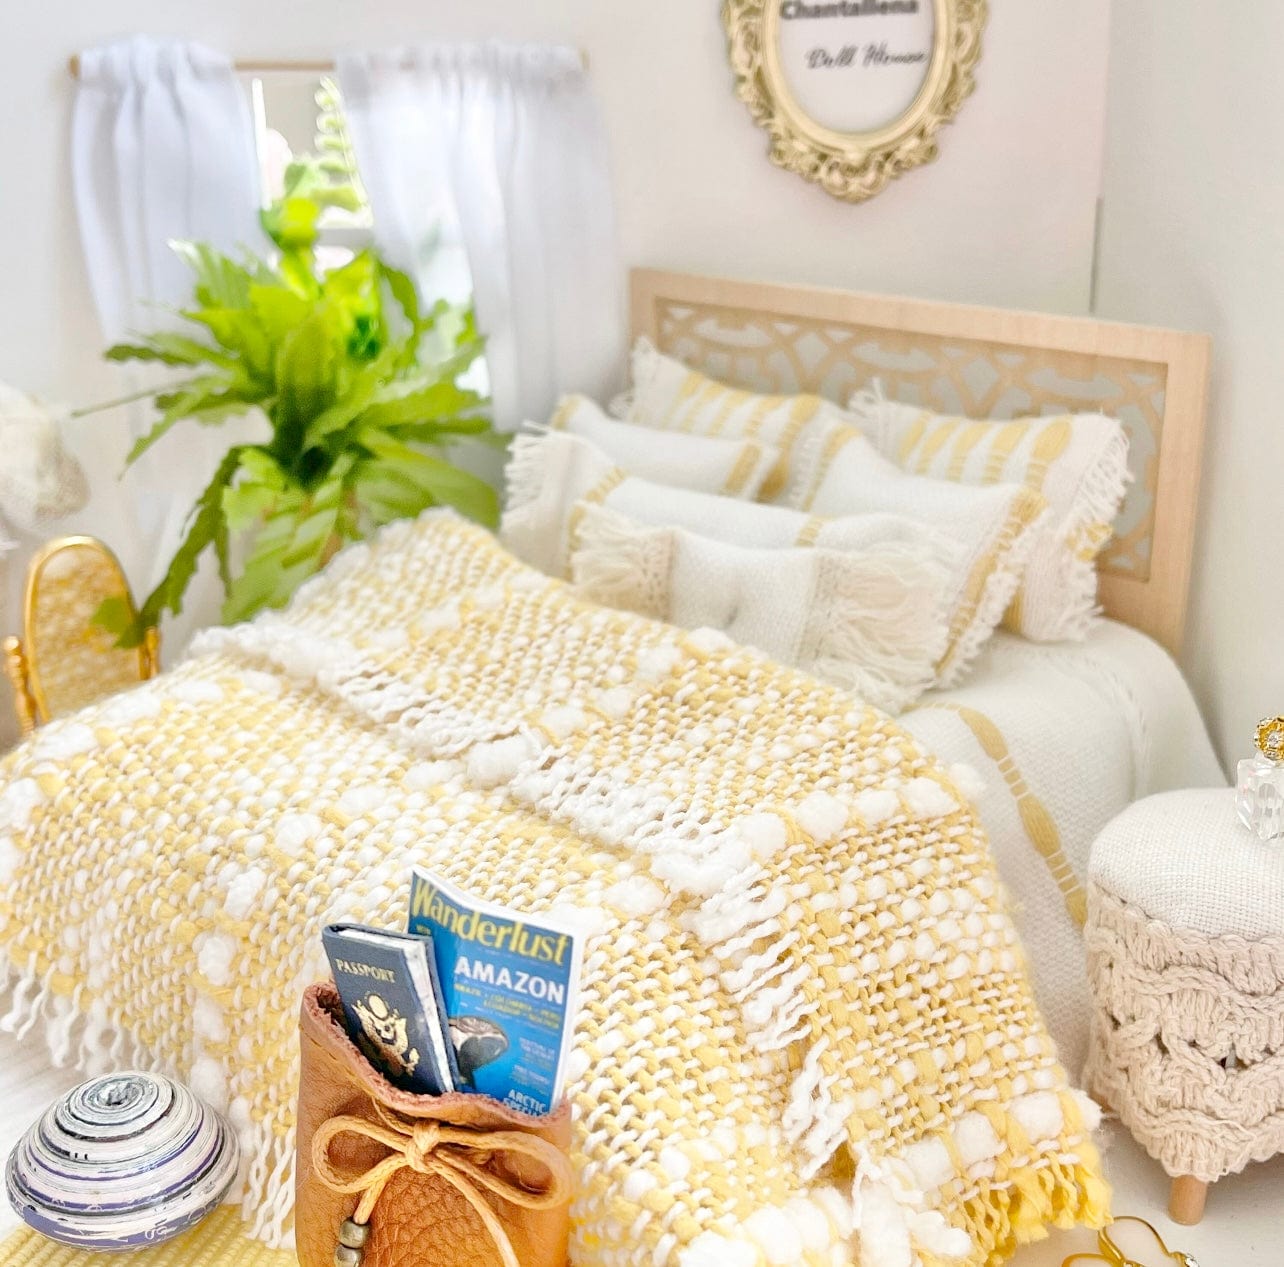 Chantallena Doll House Romantic Wanderlust |  Soft White Cotton Set with Yellow Stripes and Textured Bedspread| Farah